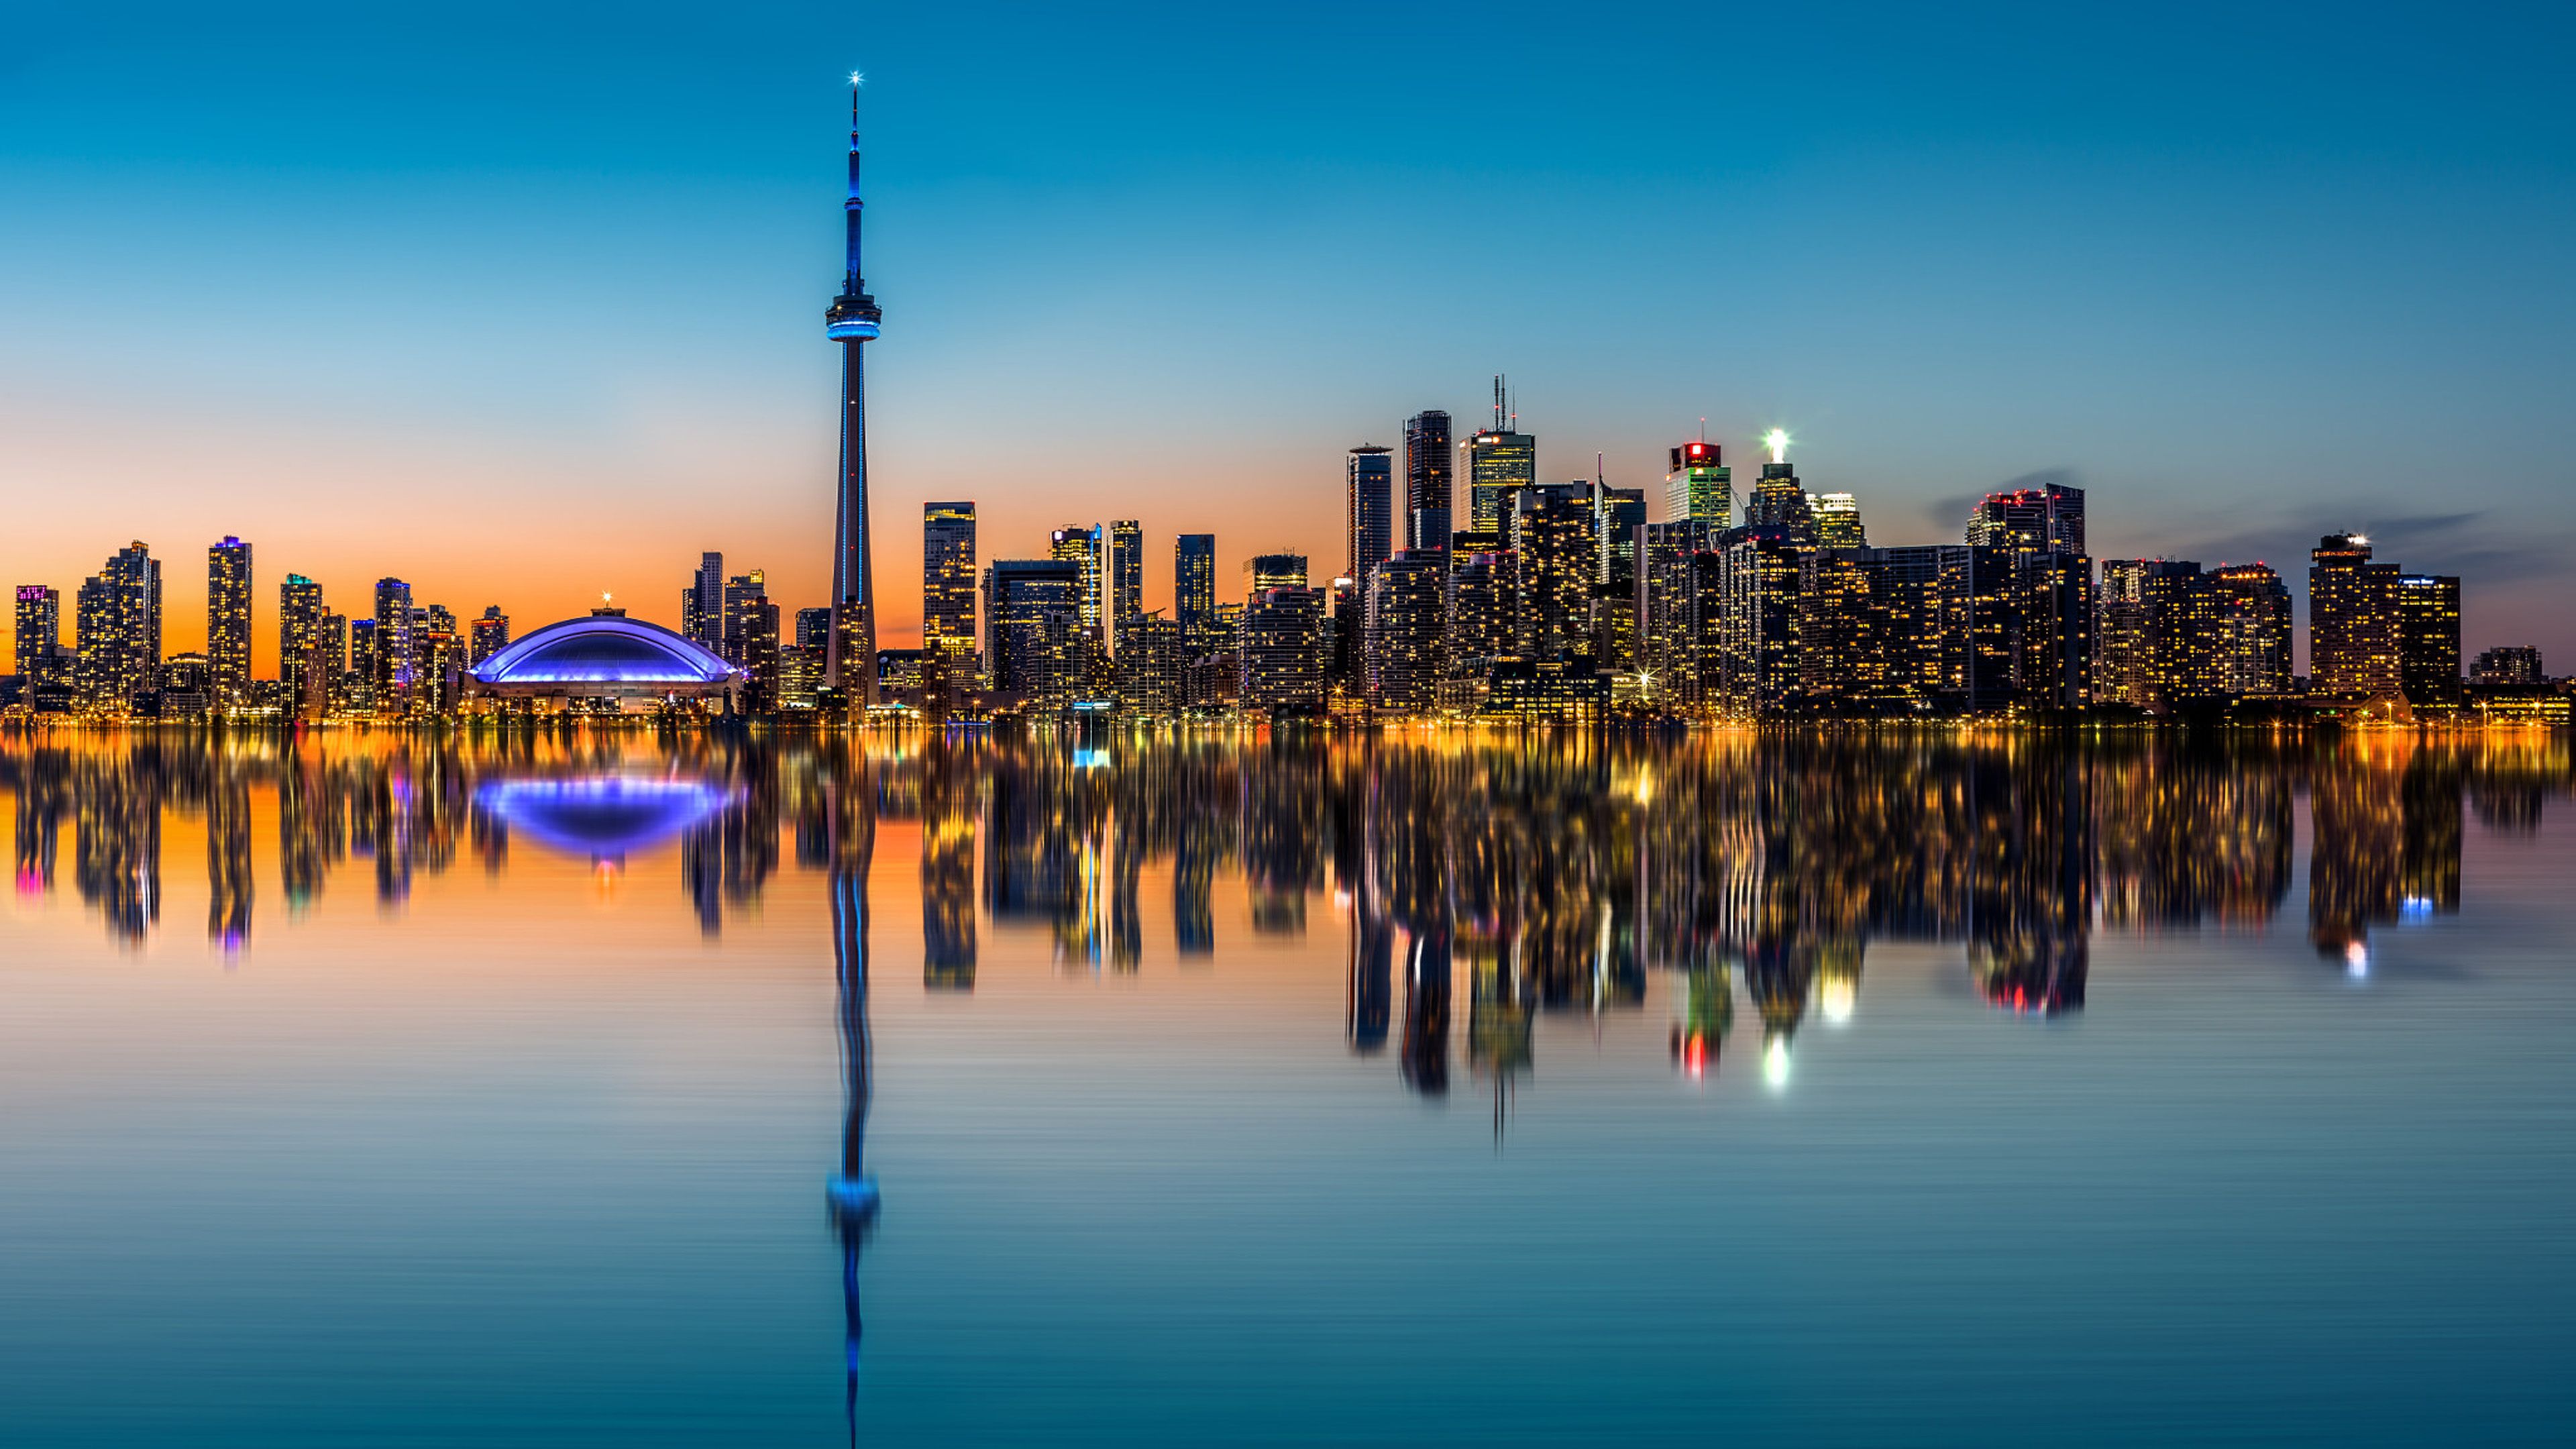 3840x2160 Toronto Skyline Reflection Of Buildings In Harbor Bay Harbor Bay Toronto Canada Night Landscape Hd Wallpaper For Tablets Free Download